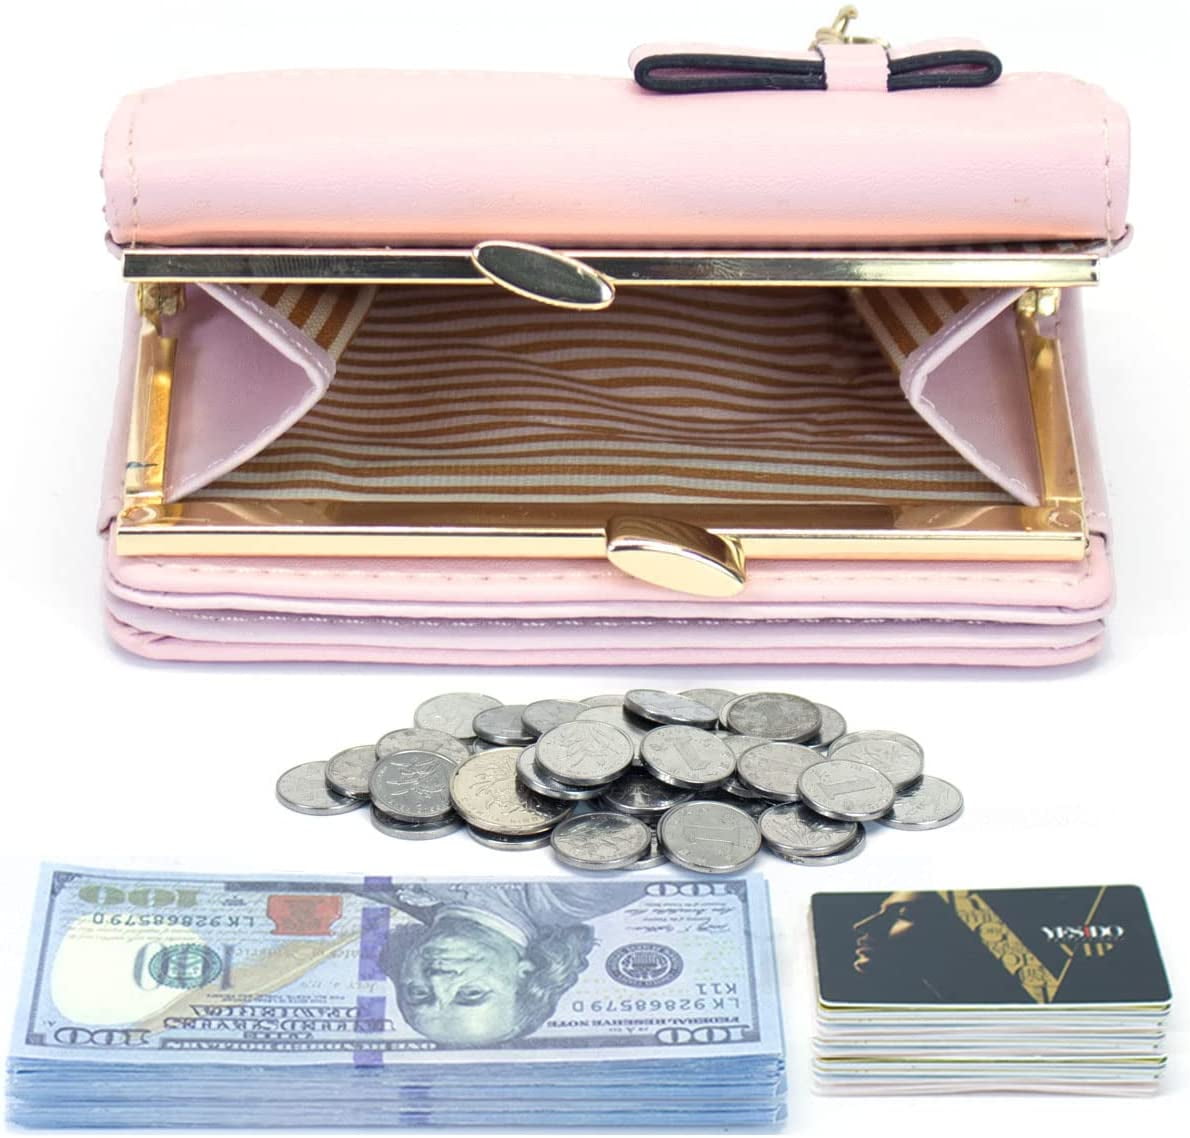  women wallet Money Bag Small Cute Coin Purse (Pink-cat) :  Clothing, Shoes & Jewelry